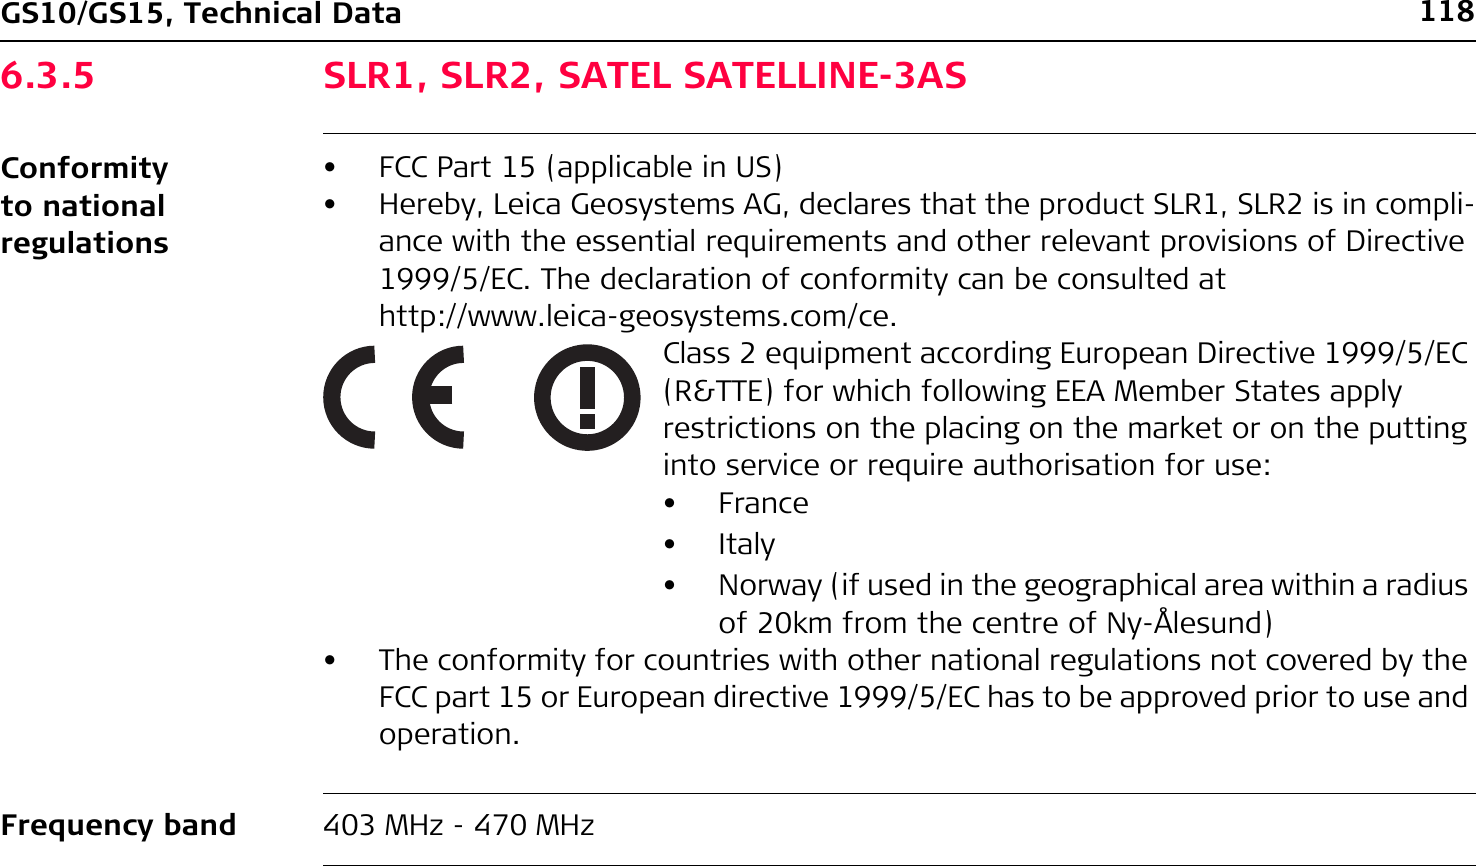 118GS10/GS15, Technical Data6.3.5 SLR1, SLR2, SATEL SATELLINE-3ASConformity to national regulationsFrequency band 403 MHz - 470 MHz• FCC Part 15 (applicable in US)• Hereby, Leica Geosystems AG, declares that the product SLR1, SLR2 is in compli-ance with the essential requirements and other relevant provisions of Directive 1999/5/EC. The declaration of conformity can be consulted at http://www.leica-geosystems.com/ce.Class 2 equipment according European Directive 1999/5/EC (R&amp;TTE) for which following EEA Member States apply restrictions on the placing on the market or on the putting into service or require authorisation for use:•France•Italy• Norway (if used in the geographical area within a radius of 20km from the centre of Ny-Ålesund)• The conformity for countries with other national regulations not covered by the FCC part 15 or European directive 1999/5/EC has to be approved prior to use and operation.